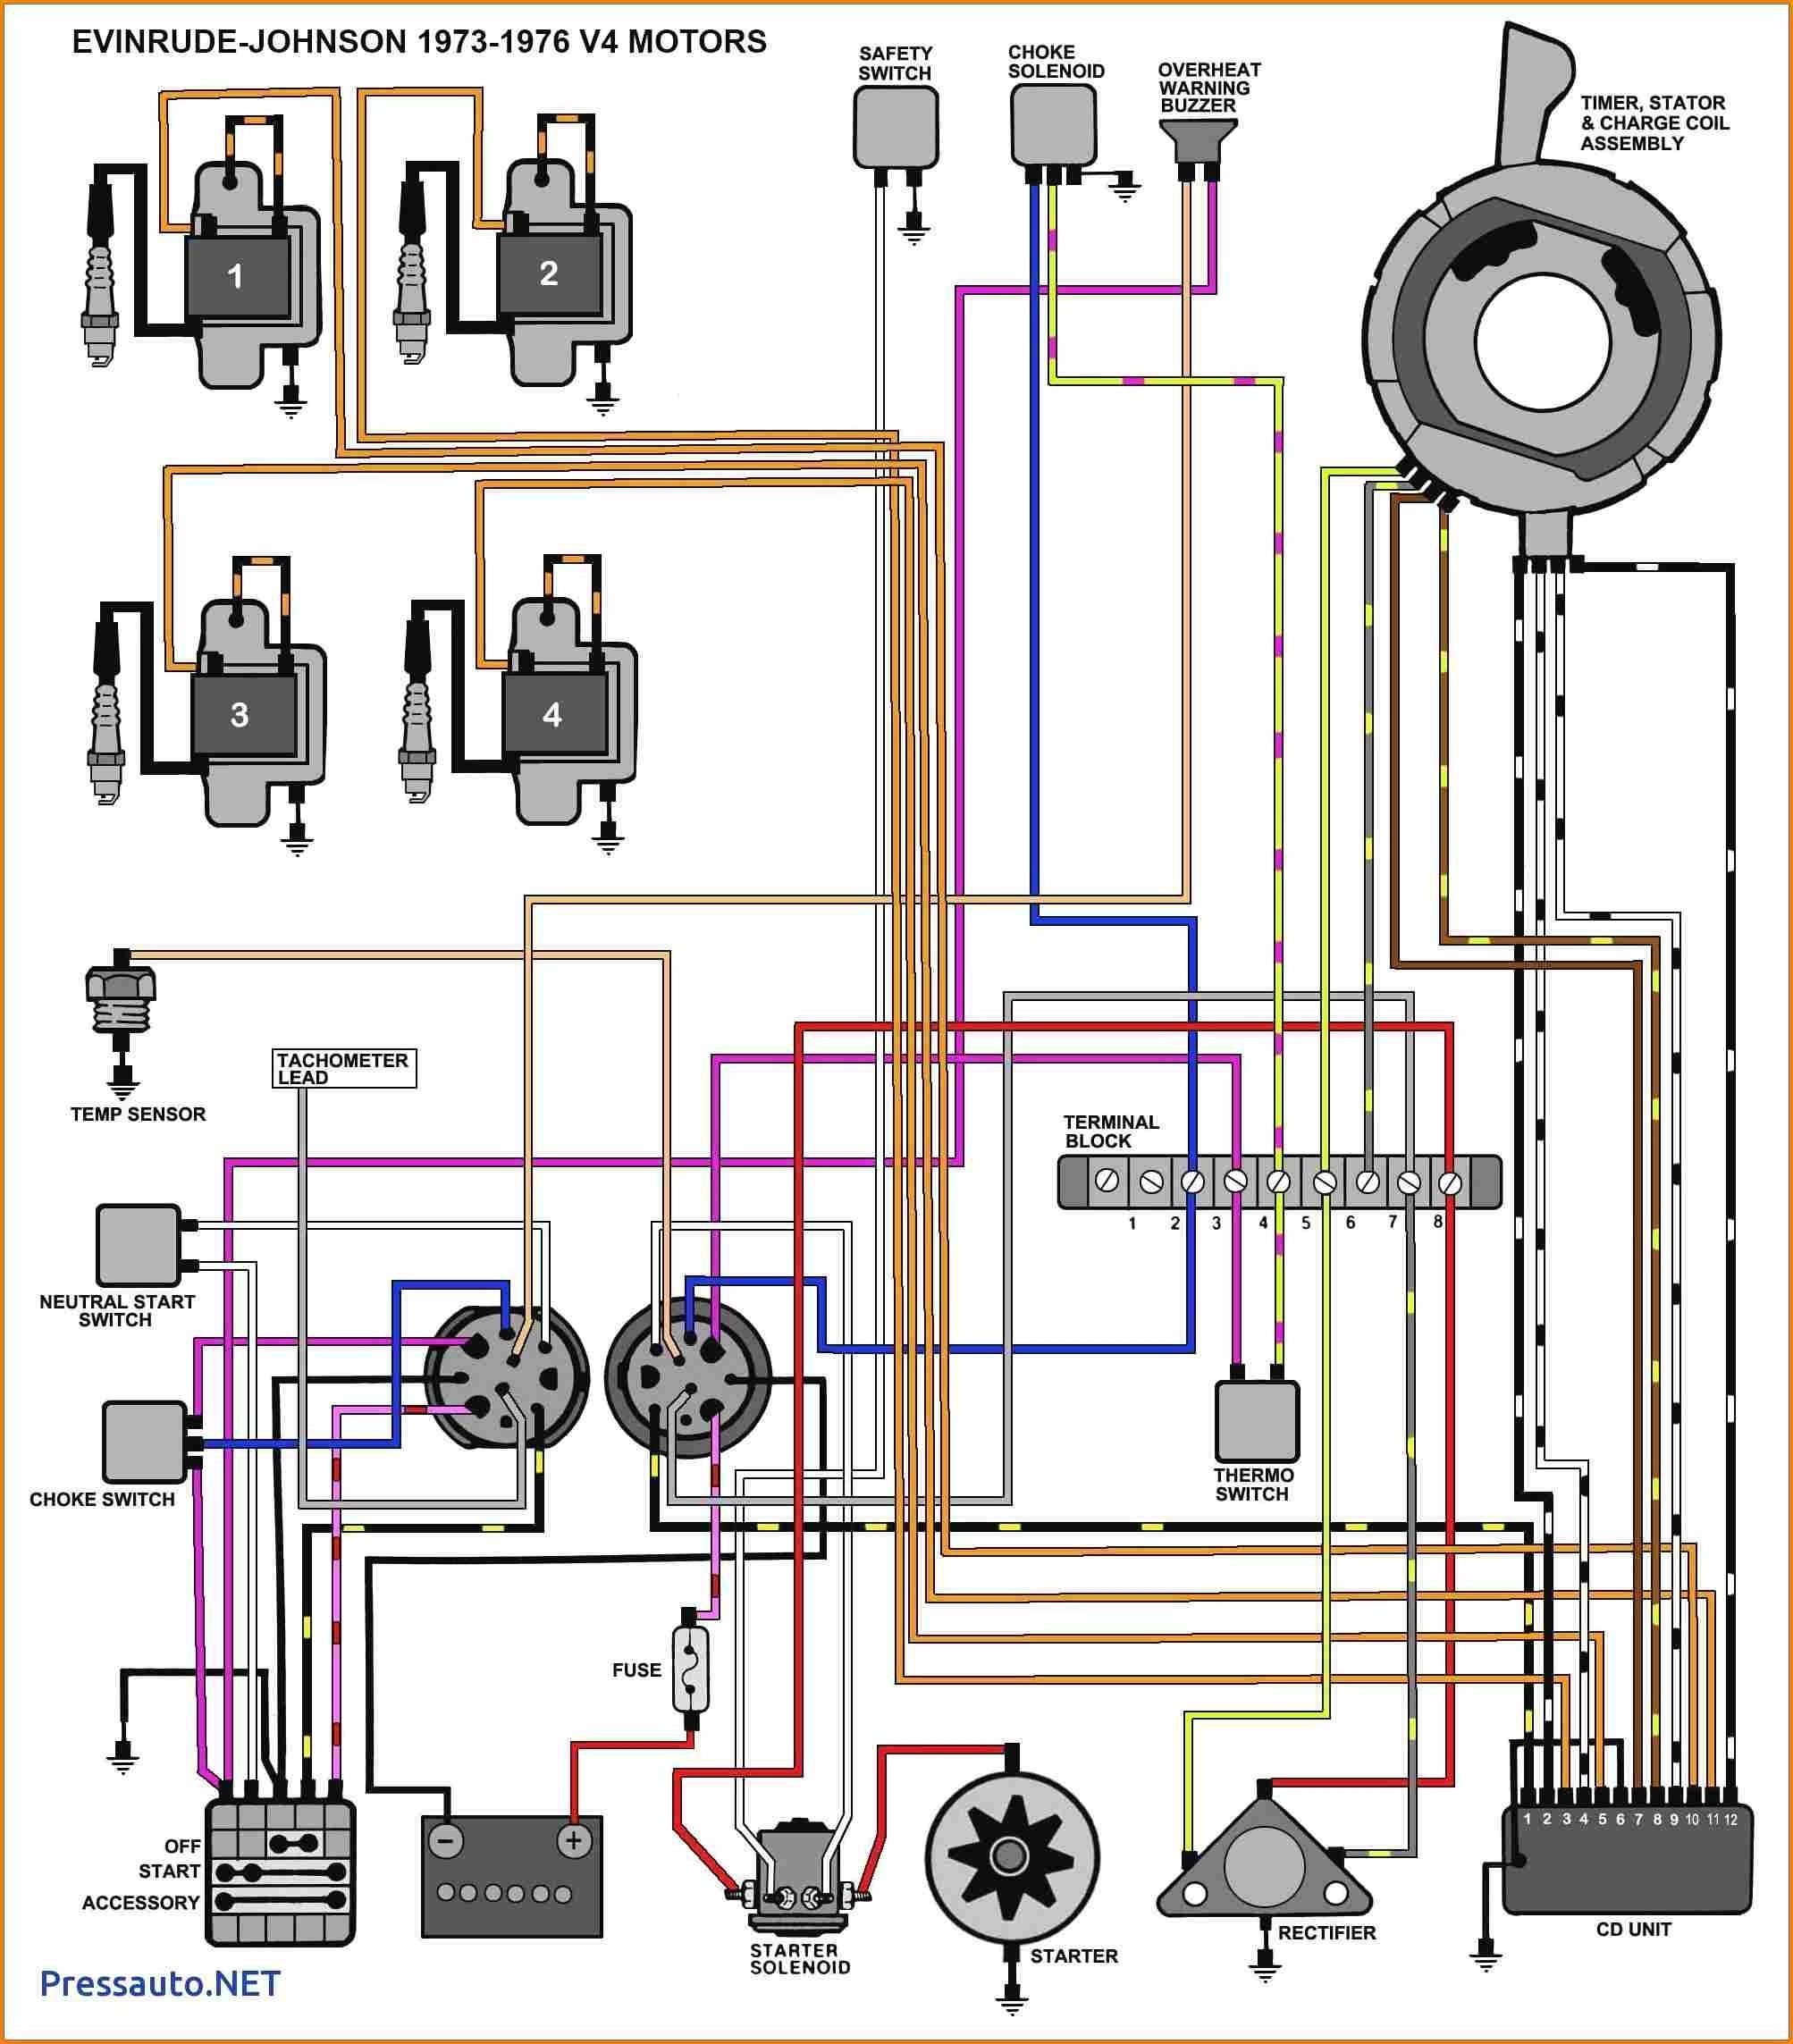 Johnson Ignition Switch Wiring Diagram | Manual E-Books - Johnson Ignition Switch Wiring Diagram